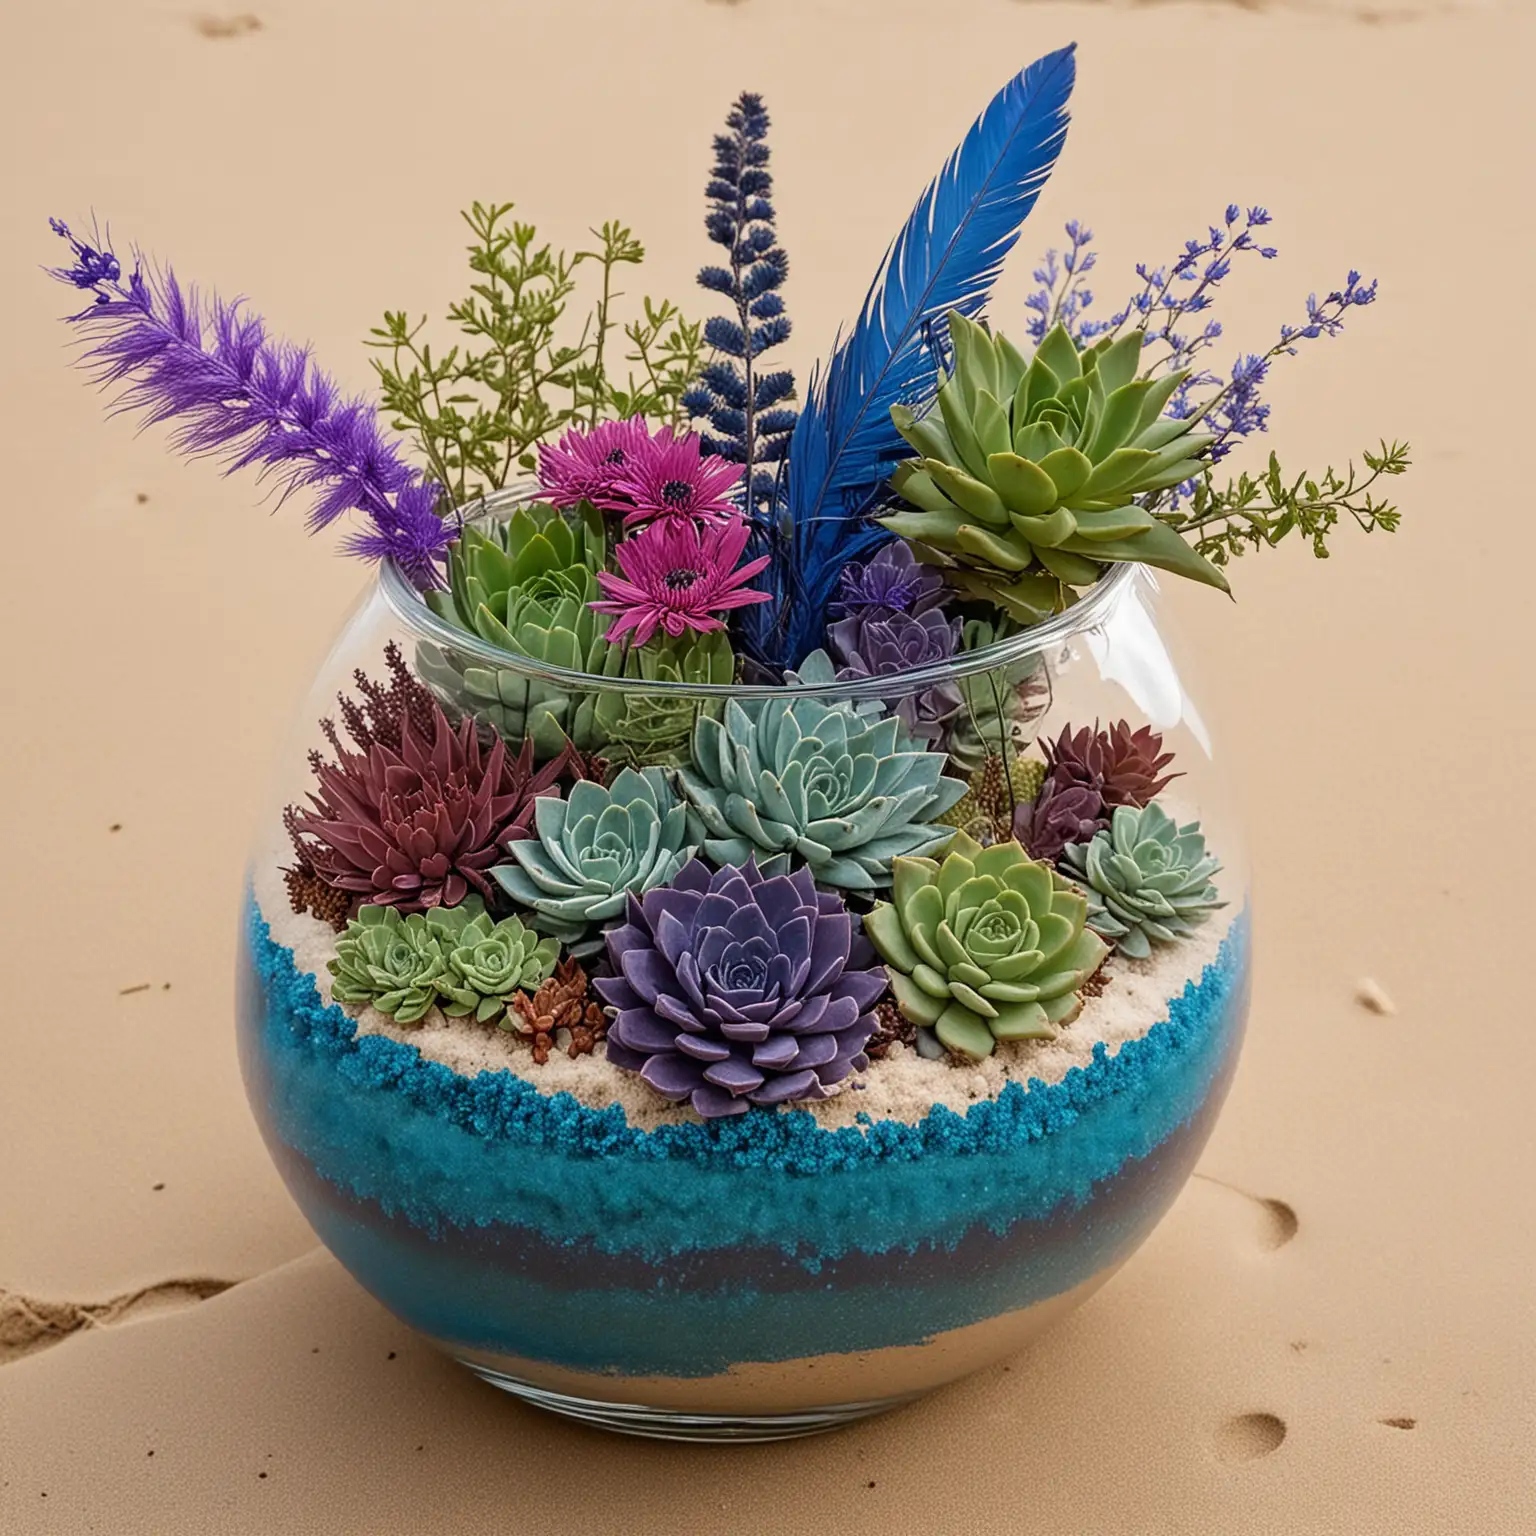 a clear glass fishbowl vase with fringe wrapped around the vase and the vase has layers of sapphire blue, turquoise and deep purple sand inside with a bouquet of long stemmed wildflowers with feathers mixed in and tiny succulents on top of the sand in the cylinder